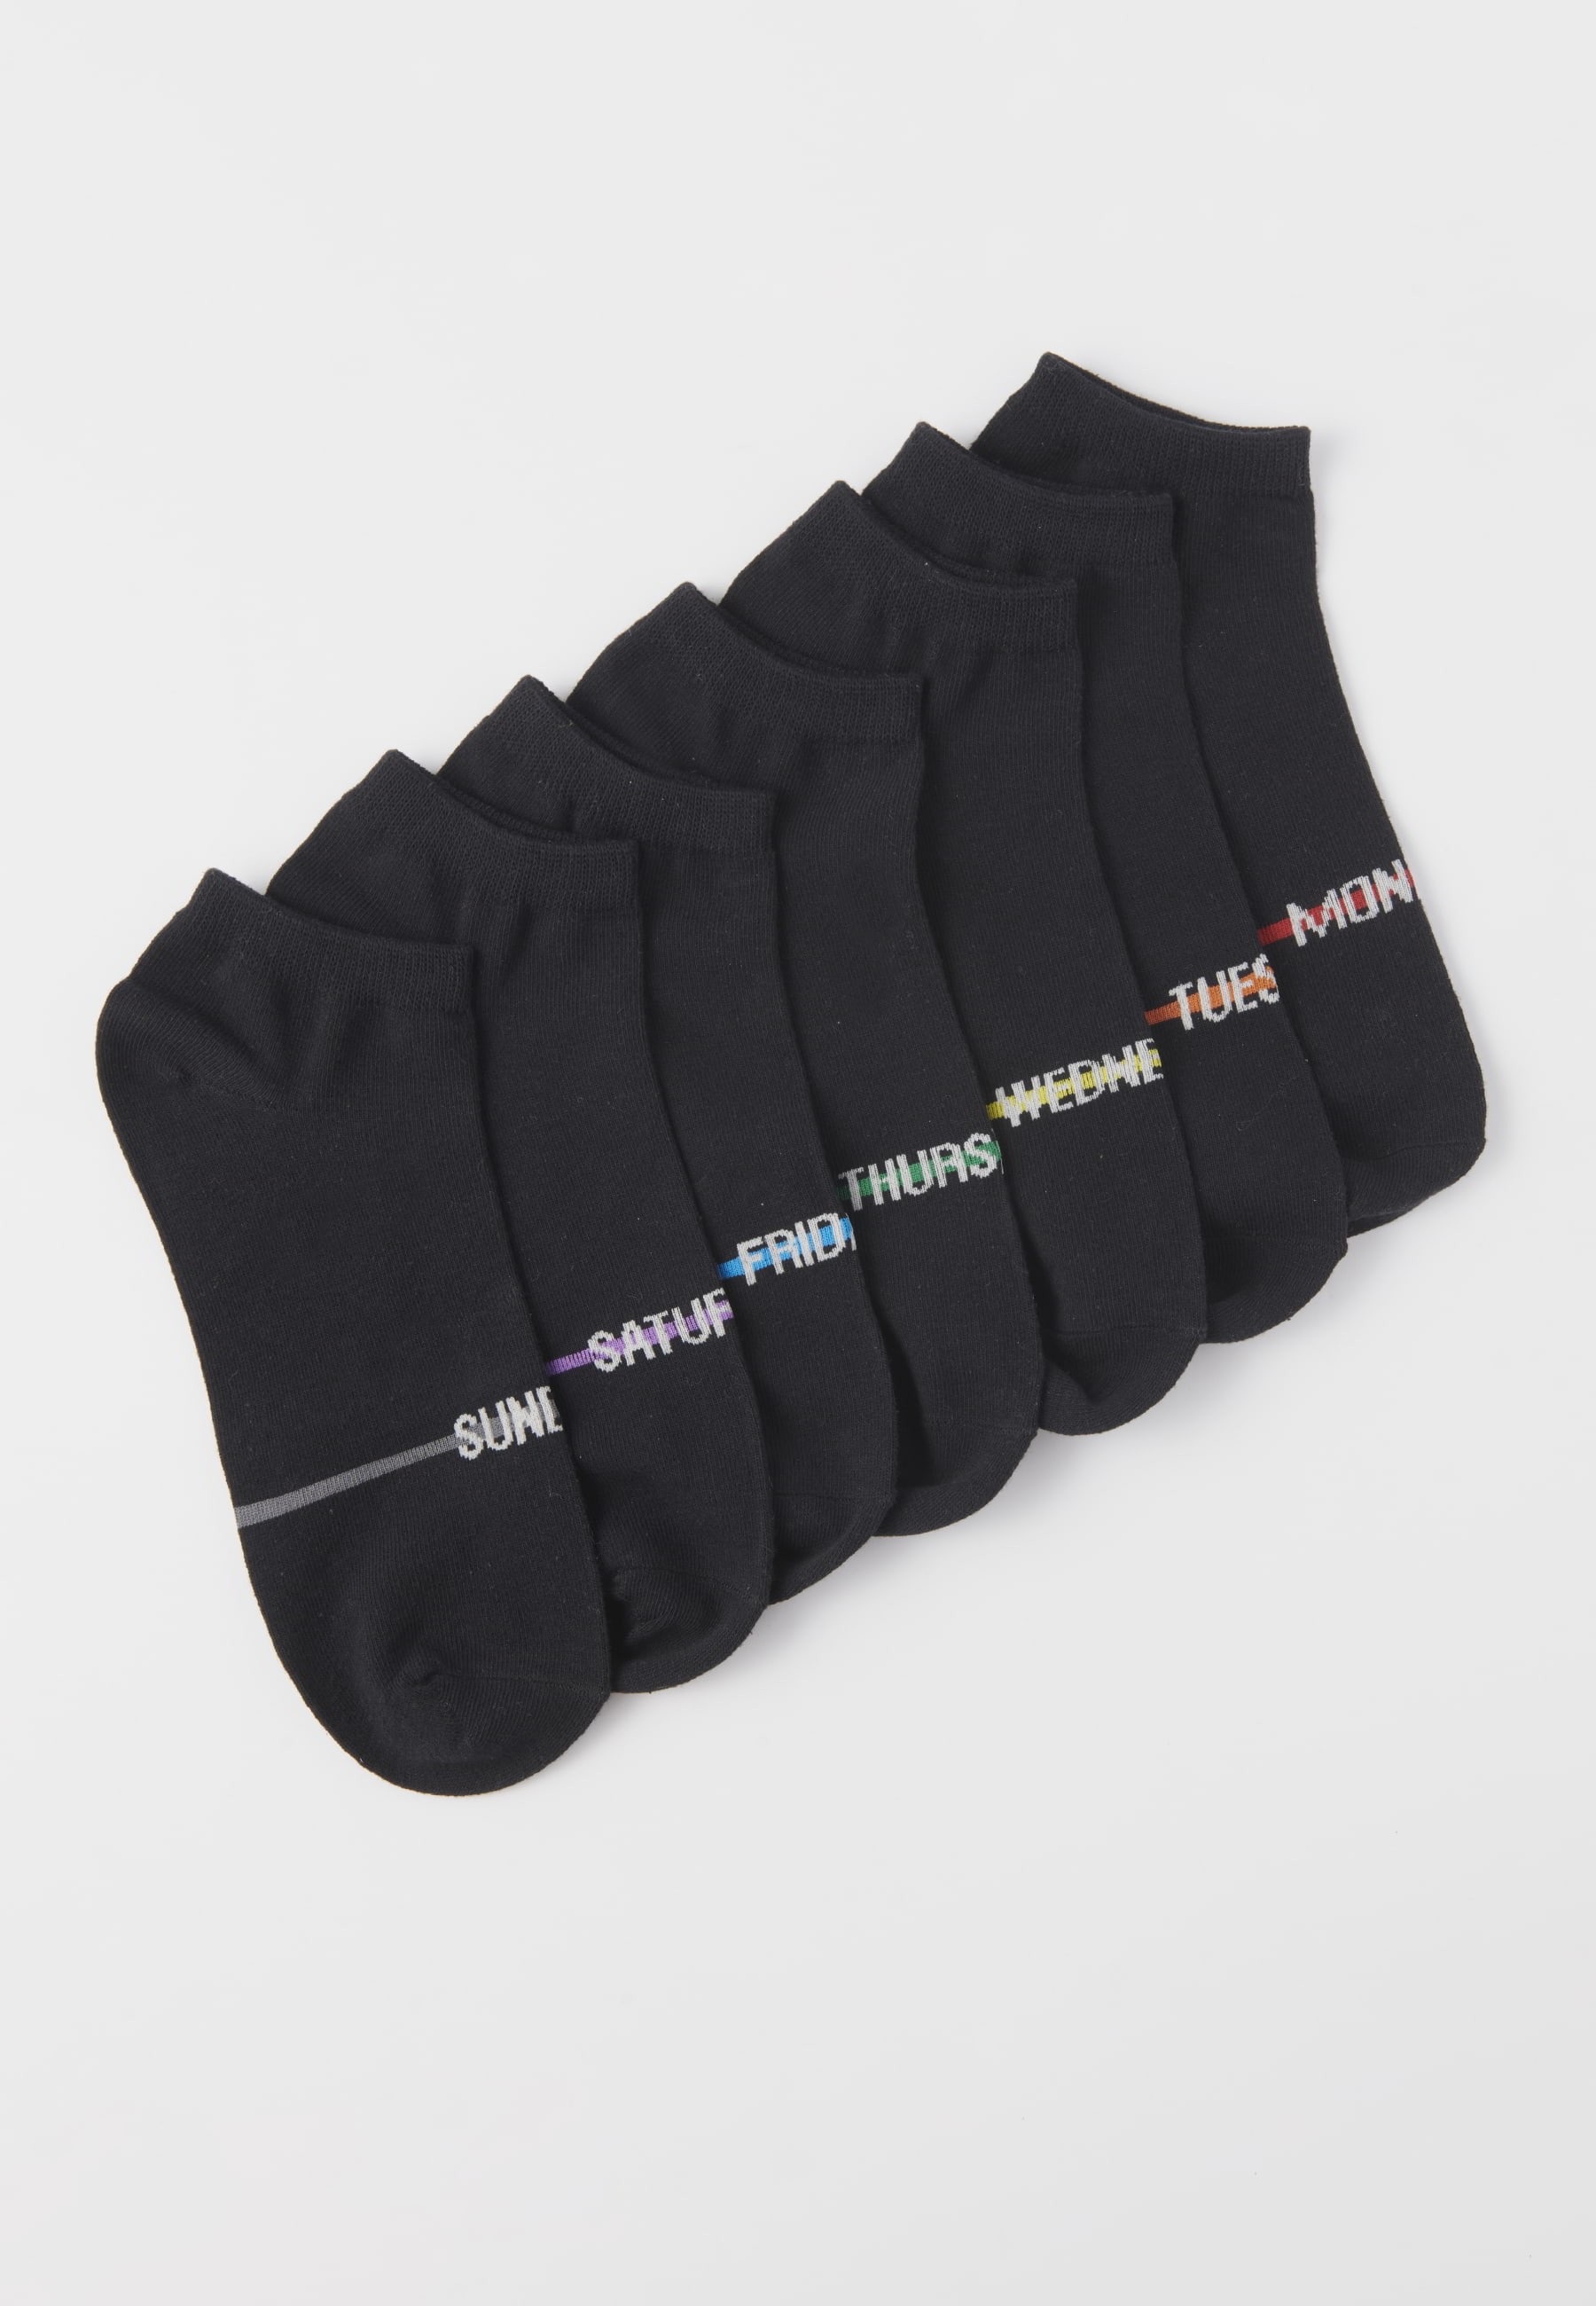 Pack of seven socks, one for each day of the week, different colors for Men